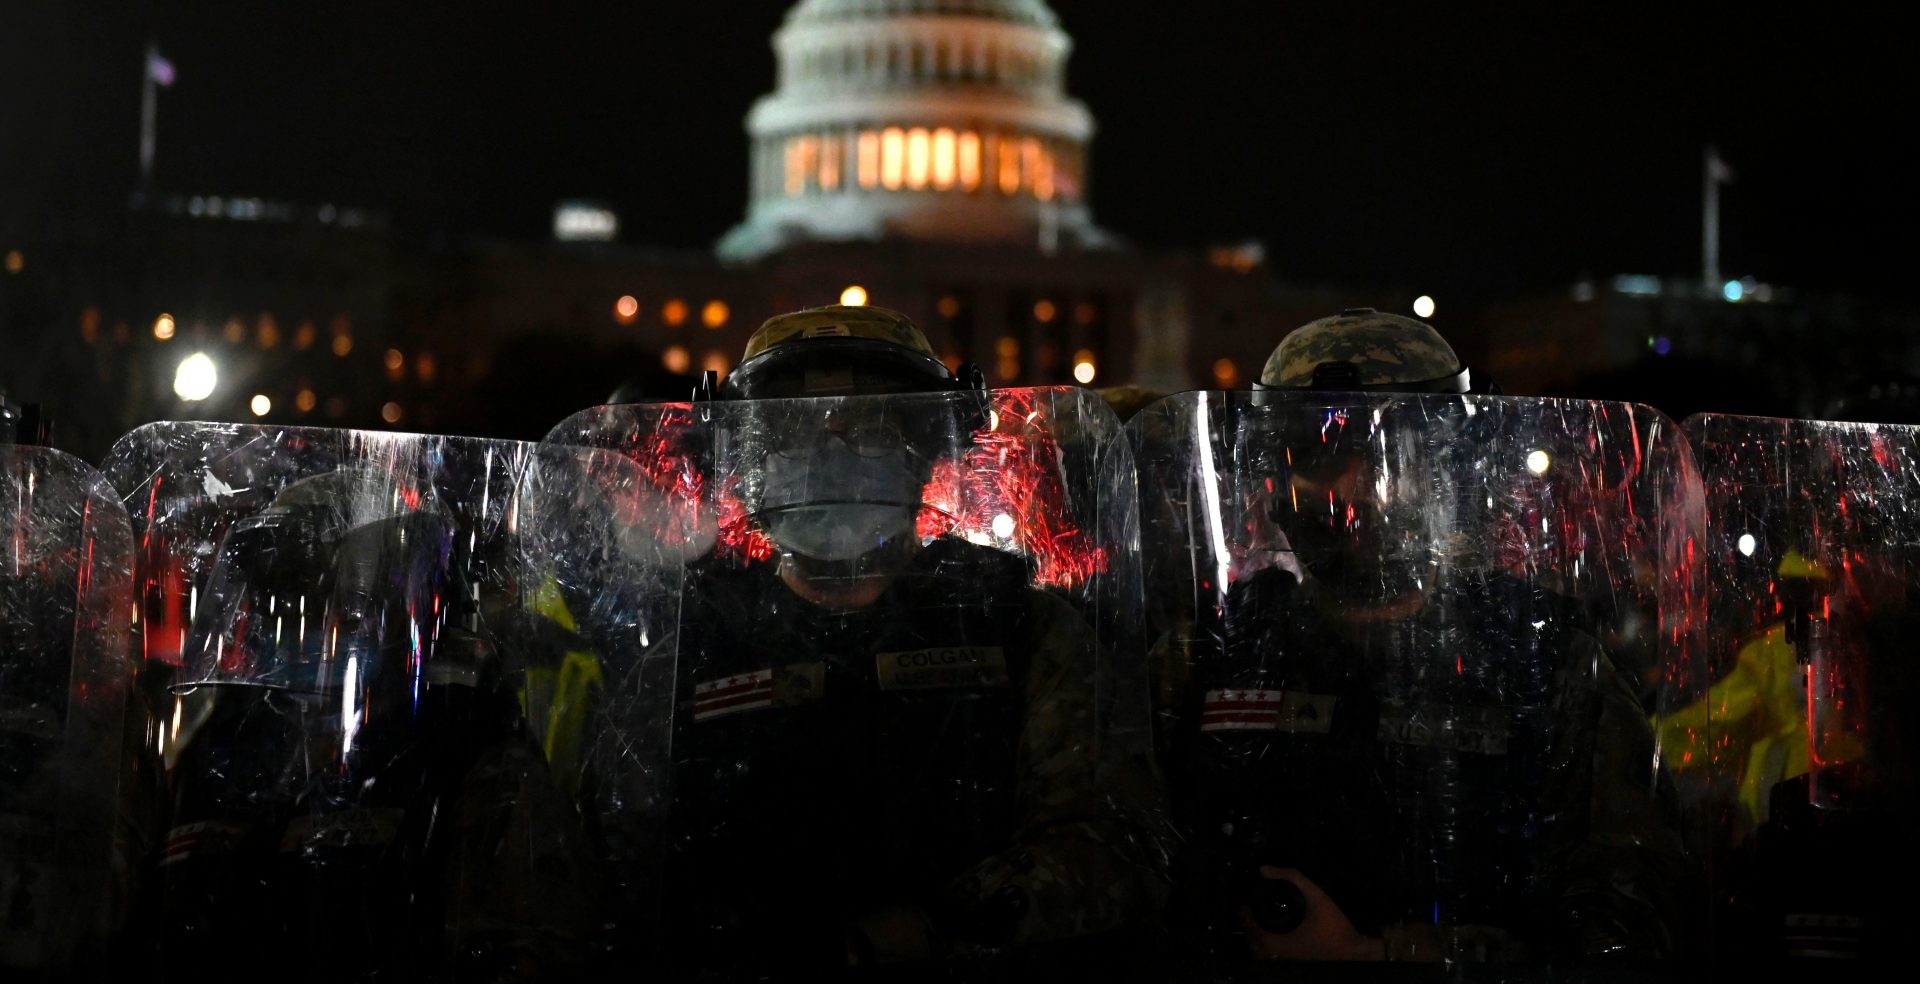 Members of the D.C. National Guard are deployed outside of the U.S. Capitol on Wednesday evening. Supporters of President Trump stormed a session of Congress earlier in the day.